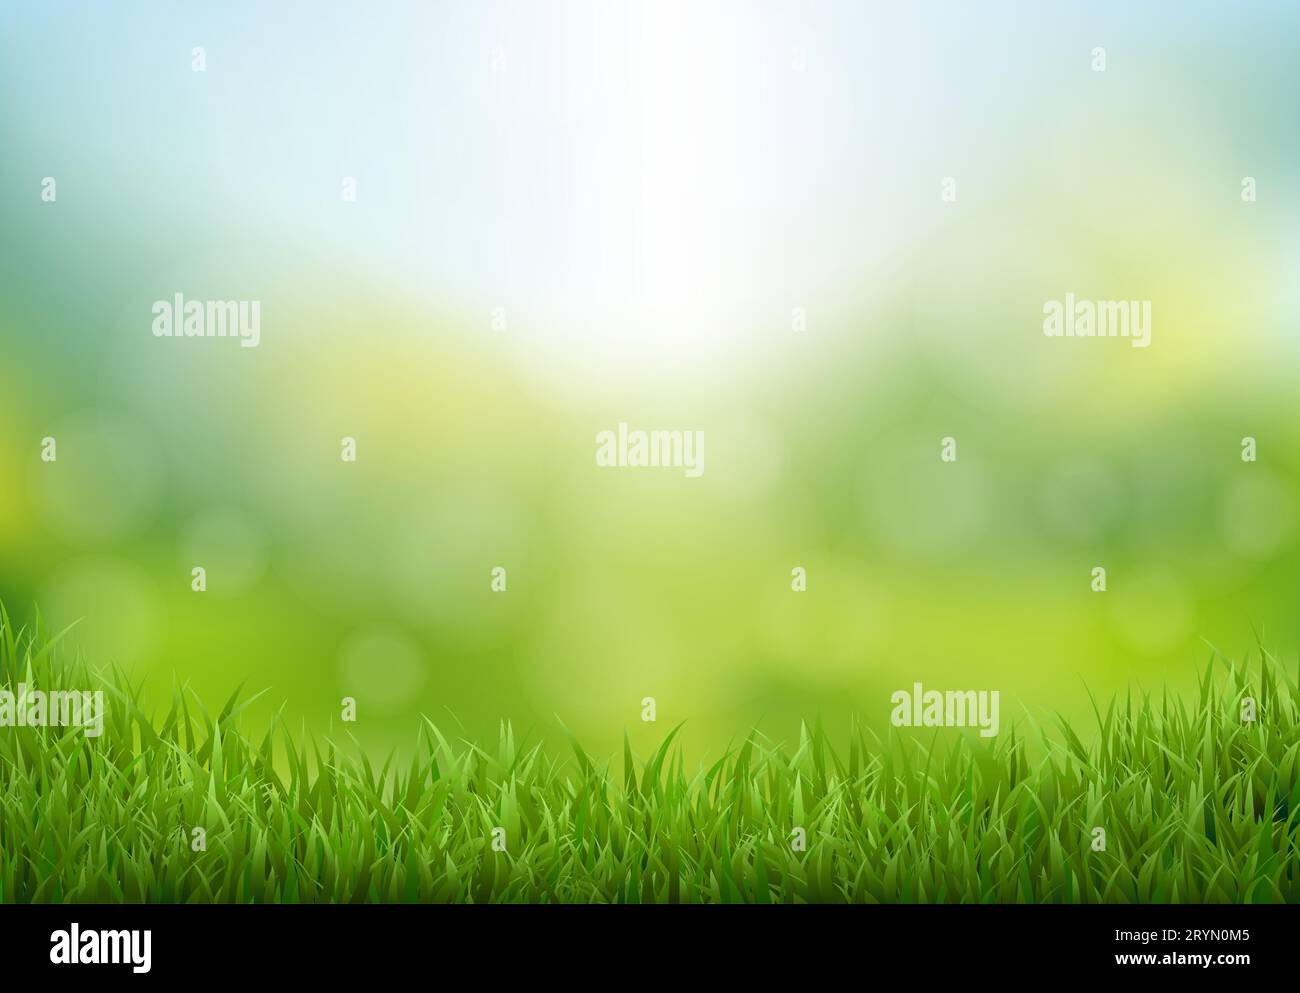 Nature Landscape With Grass Border With Gradient Mesh, Vector ...